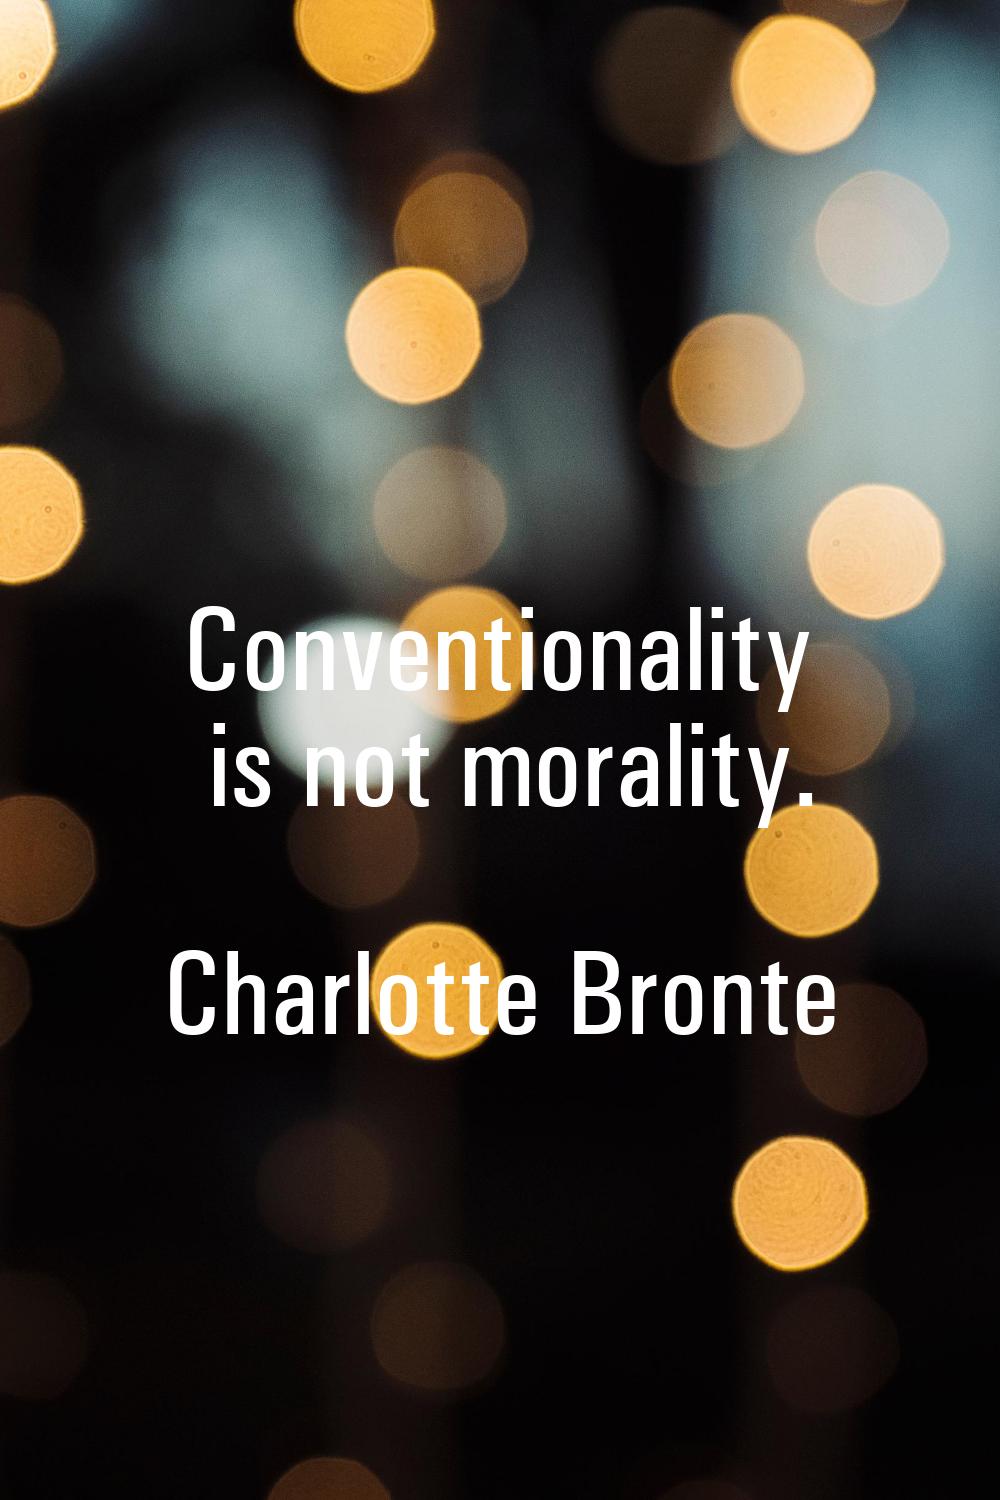 Conventionality is not morality.